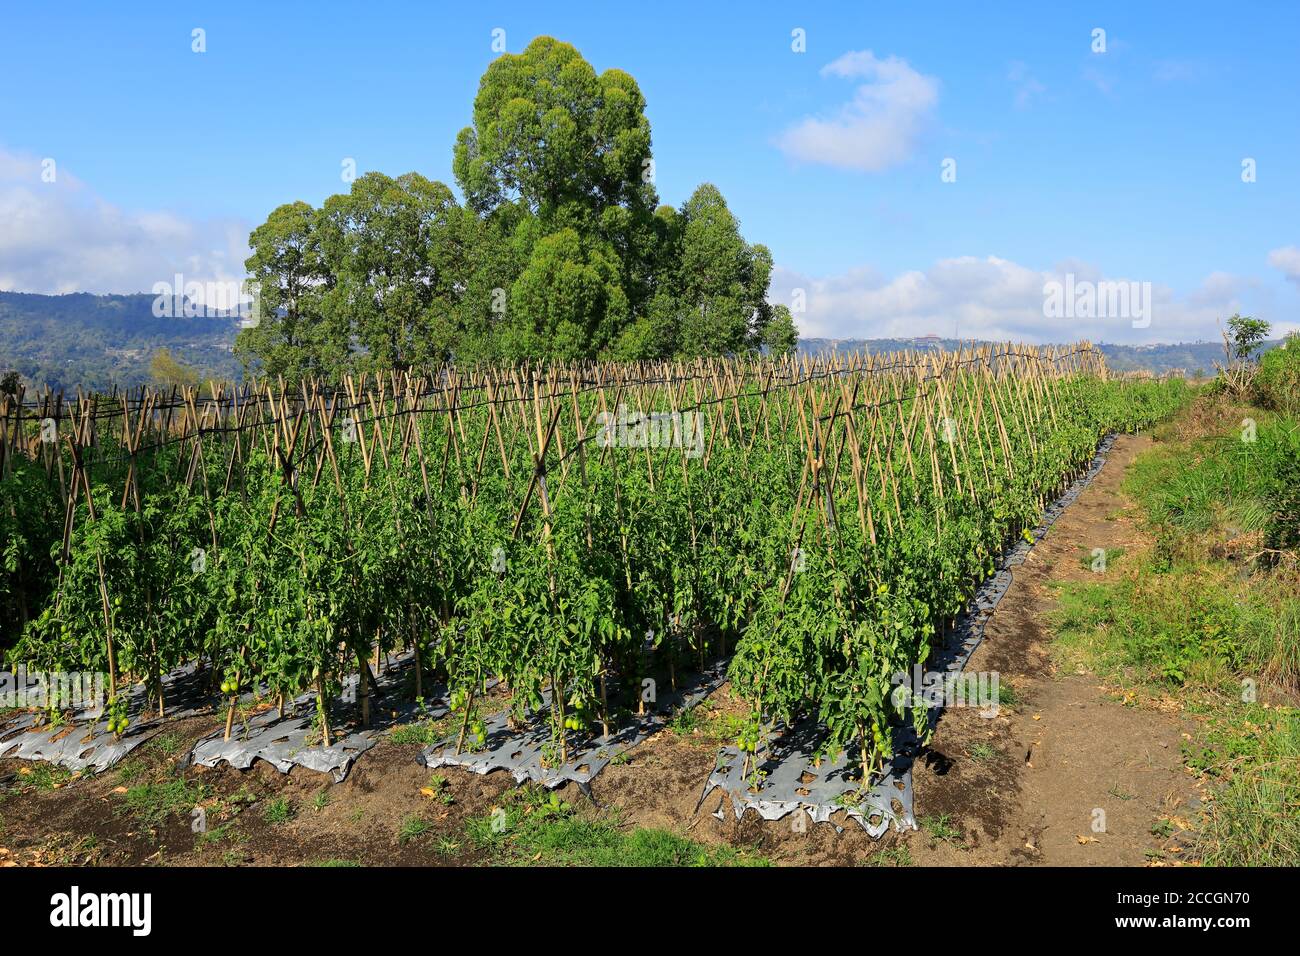 Field of tomato plants cultivated under irrigation on a rural farm, Bali, Indonesia Stock Photo